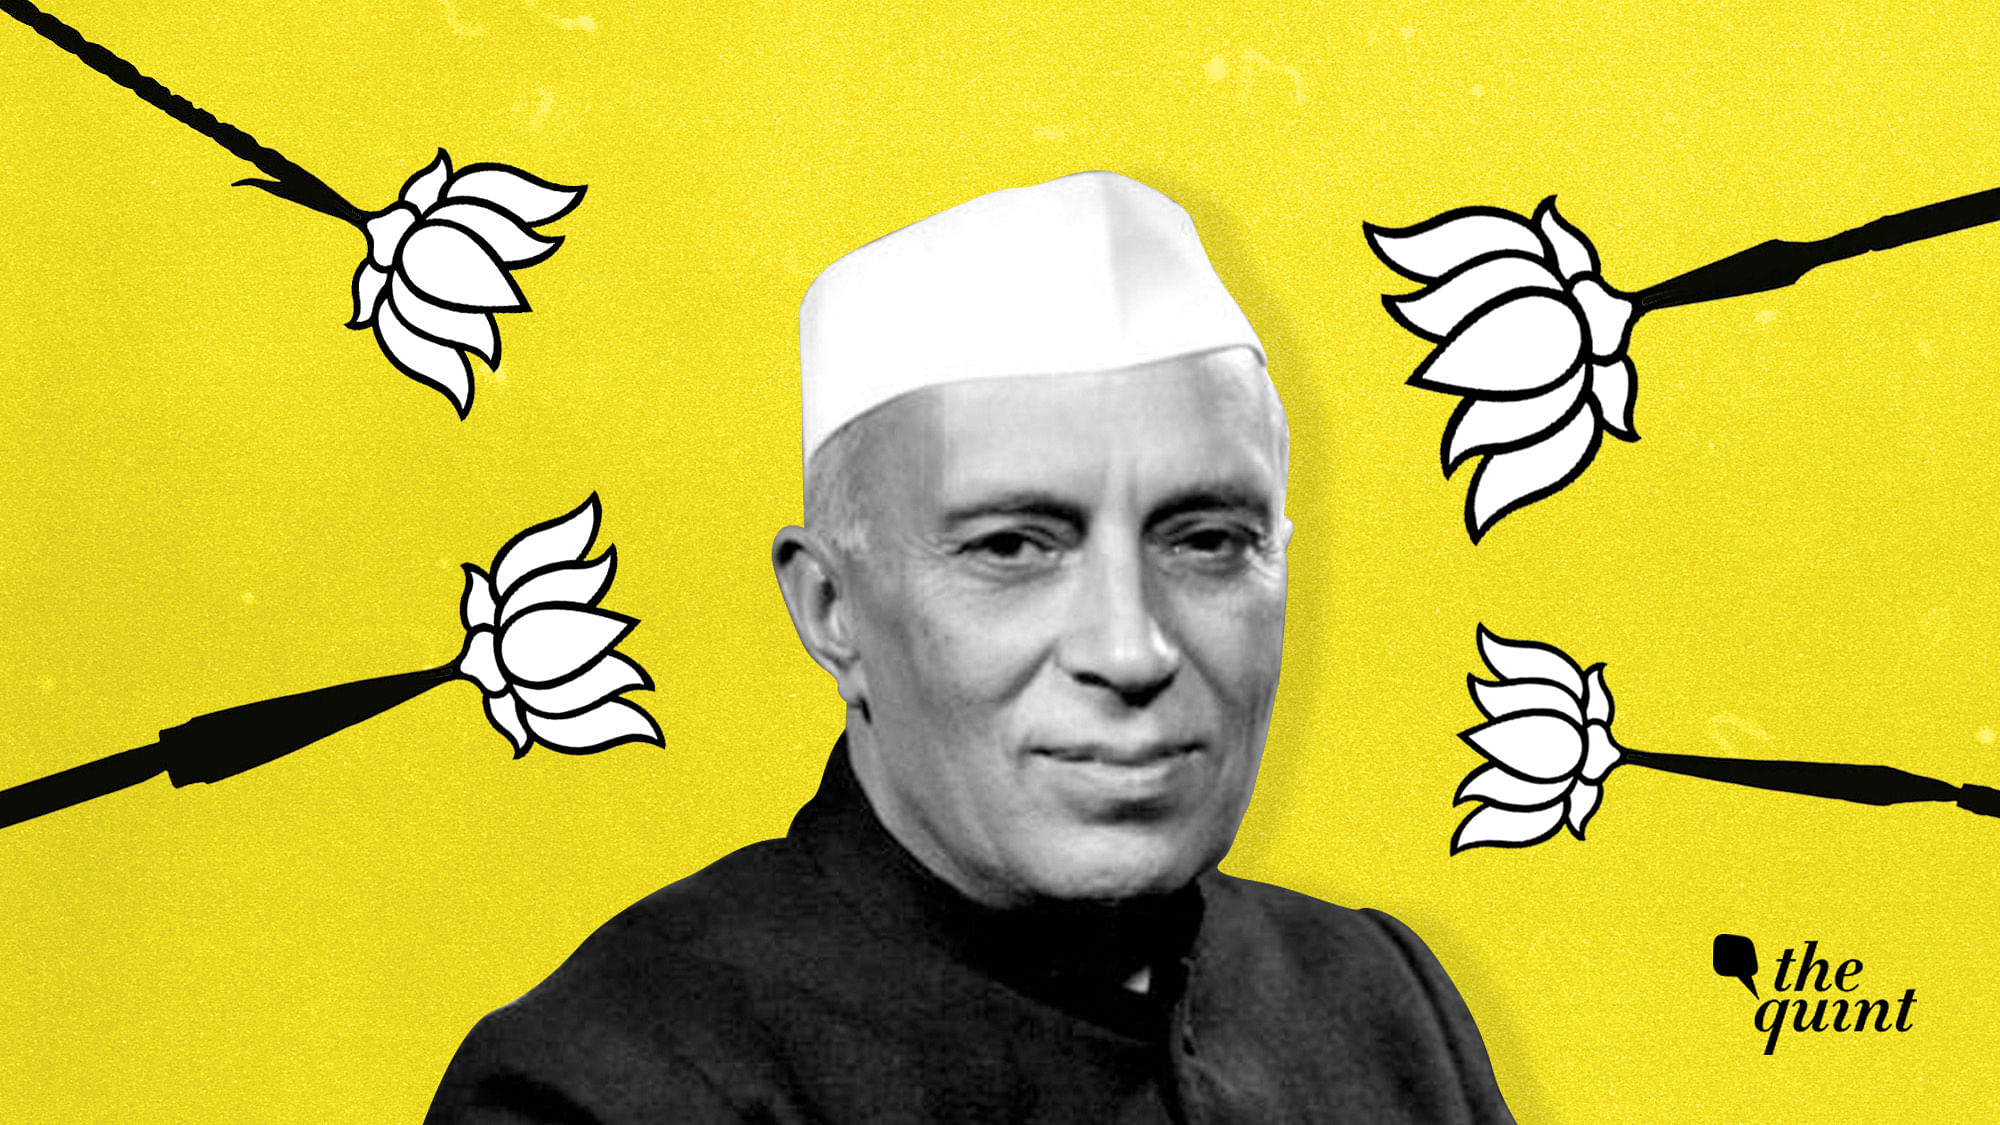 Thanks to the Prime Minister, Nehru is no longer confined to history, but a part of contemporary discourse.